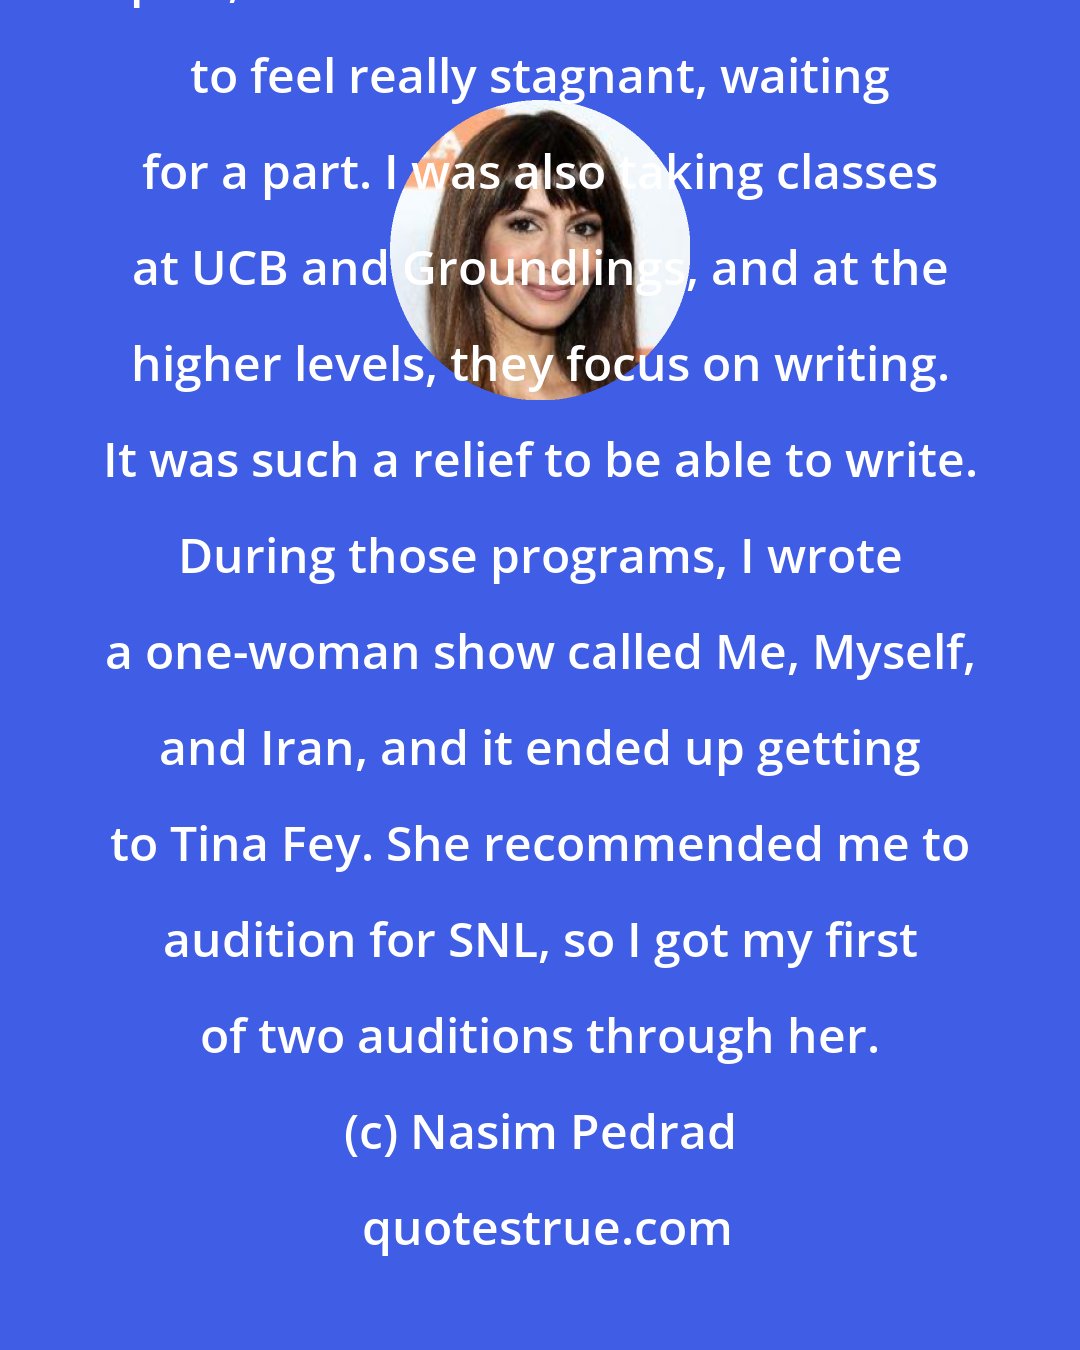 Nasim Pedrad: At the time, I was in L.A., just auditioning and hoping to land a part, dramatic or comedic. I started to feel really stagnant, waiting for a part. I was also taking classes at UCB and Groundlings, and at the higher levels, they focus on writing. It was such a relief to be able to write. During those programs, I wrote a one-woman show called Me, Myself, and Iran, and it ended up getting to Tina Fey. She recommended me to audition for SNL, so I got my first of two auditions through her.